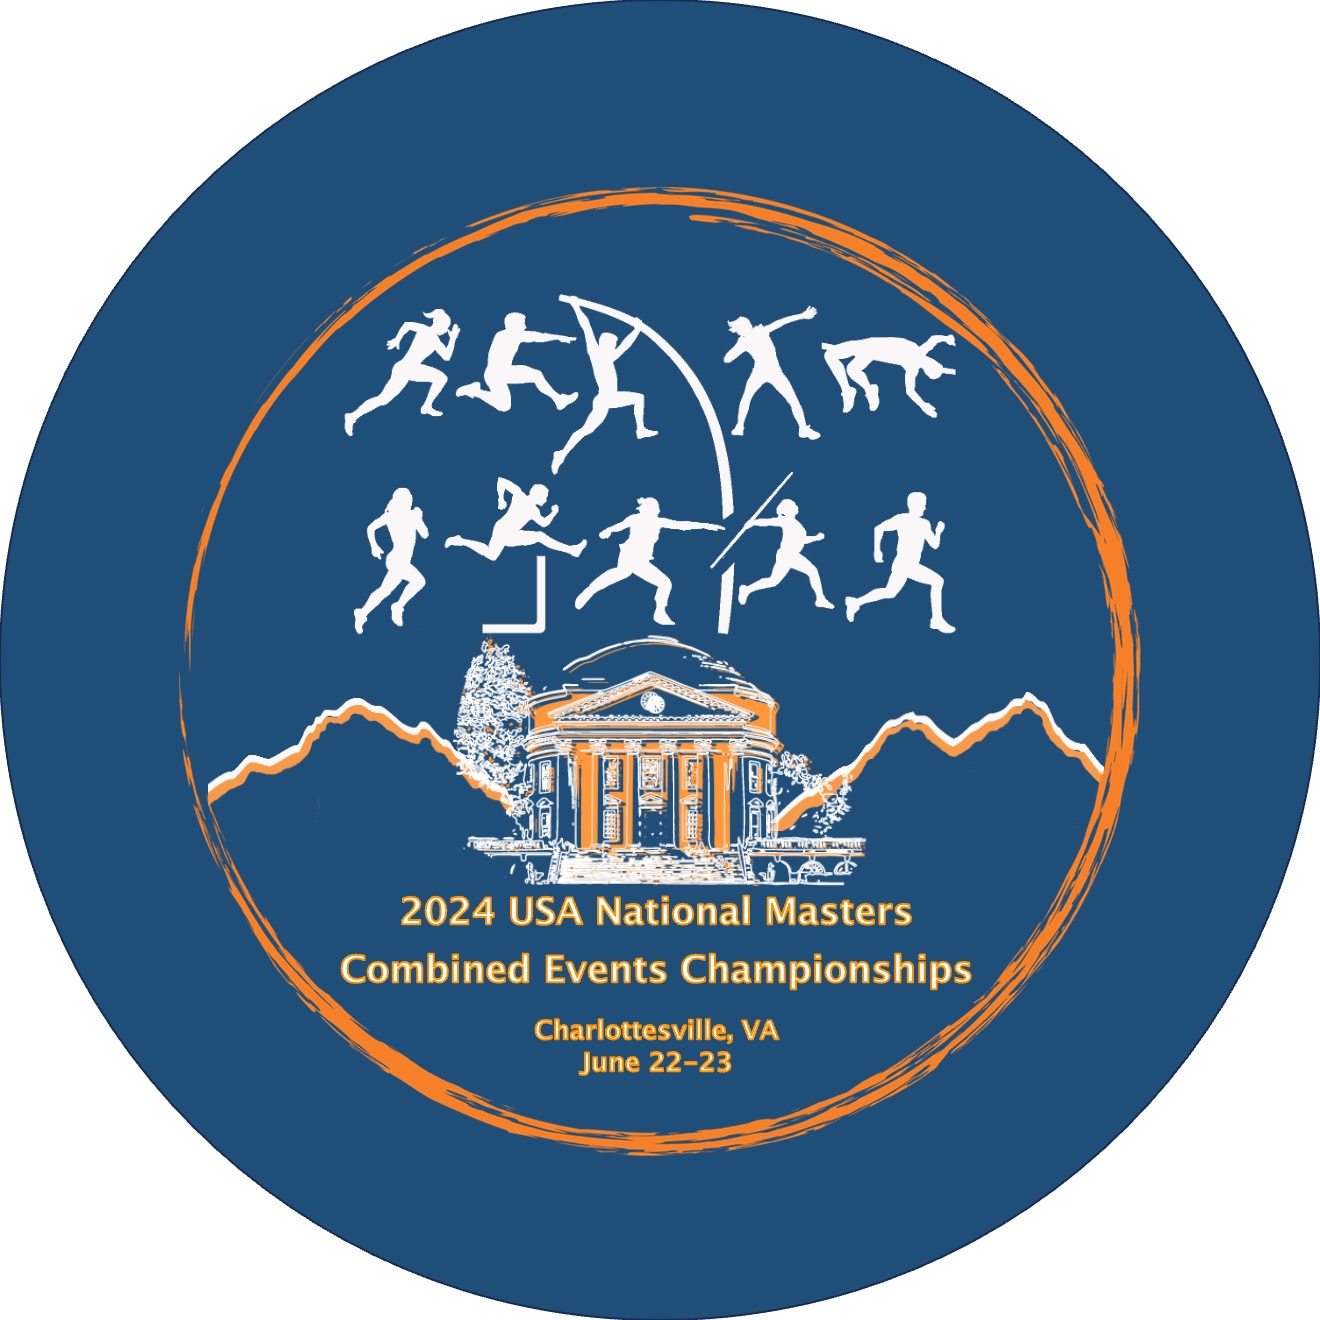 2024 USA National Masters Combined Events Championships